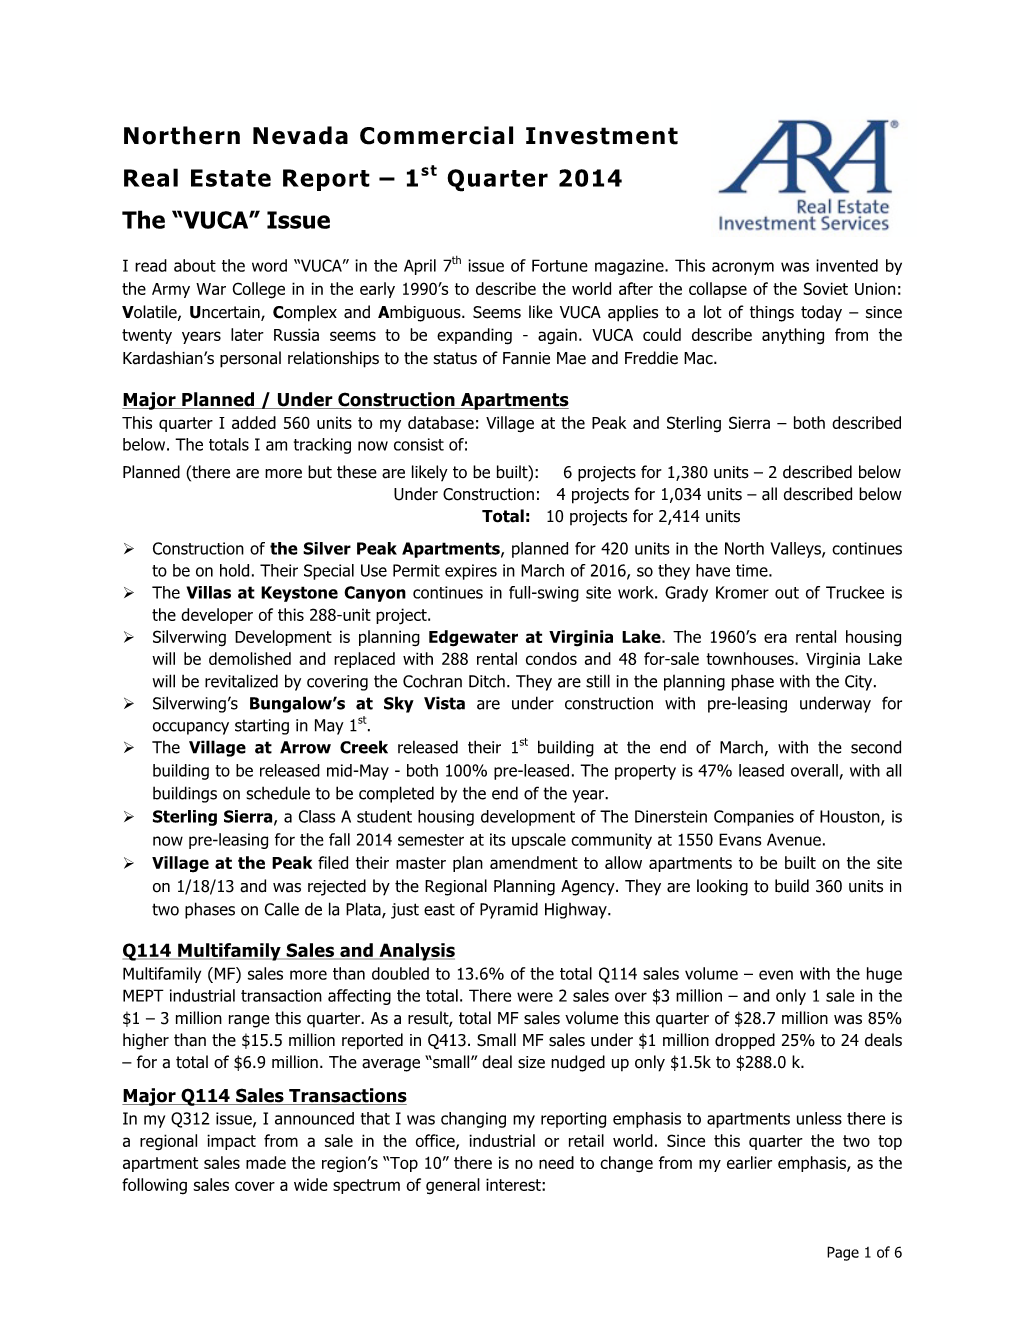 Q114 NW NV Investment RE Report Rowley